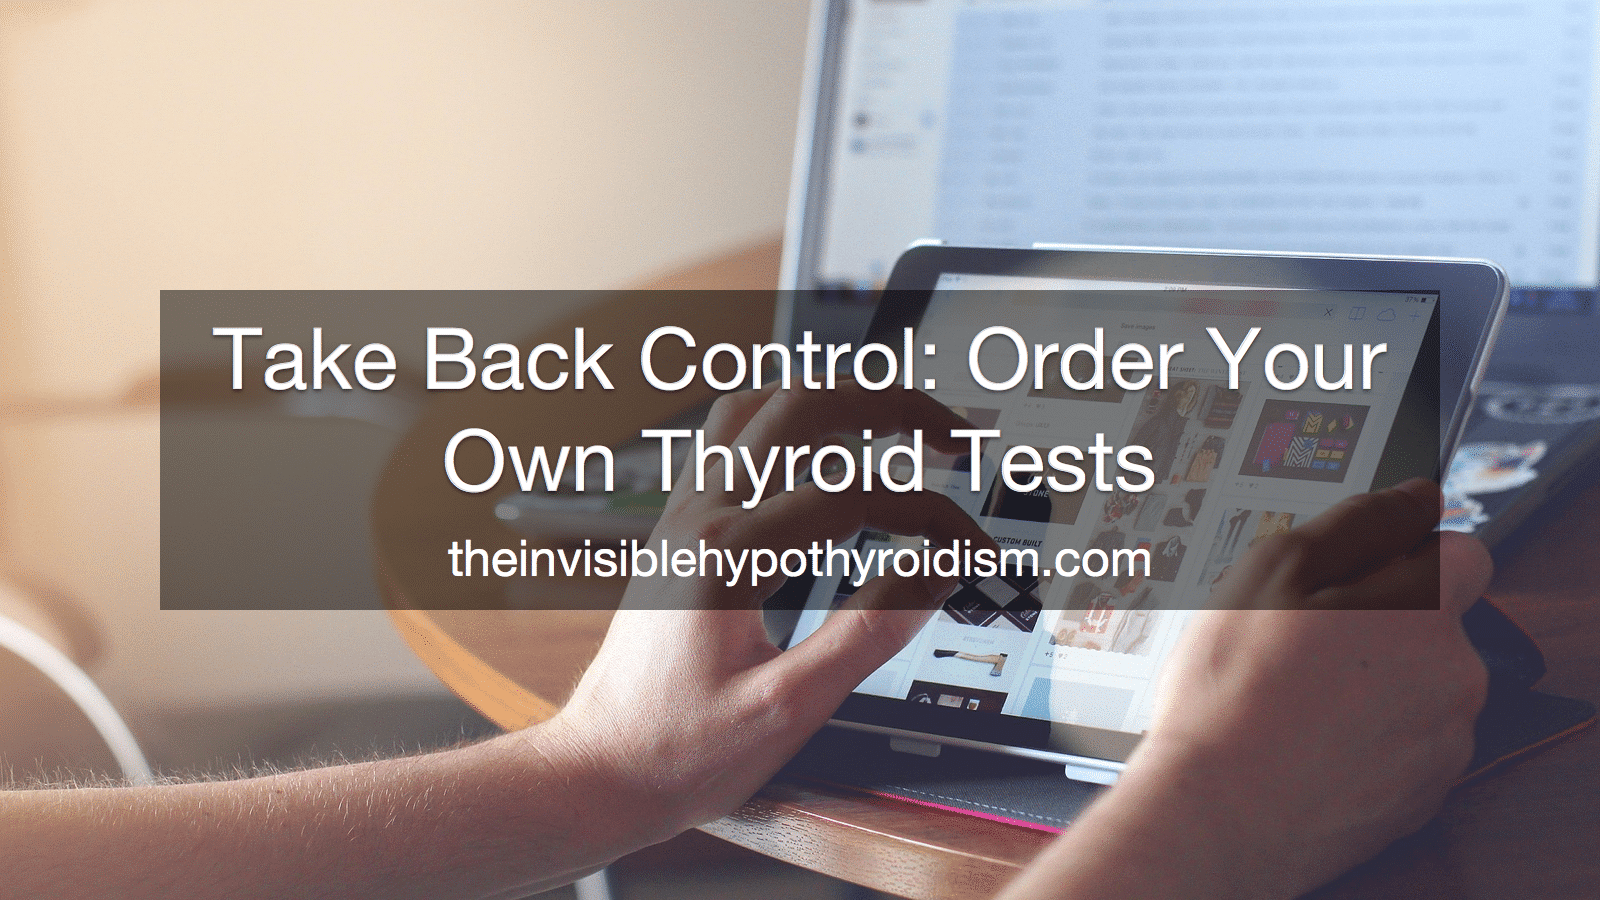 Take Back Control: Order Your Own Thyroid Tests